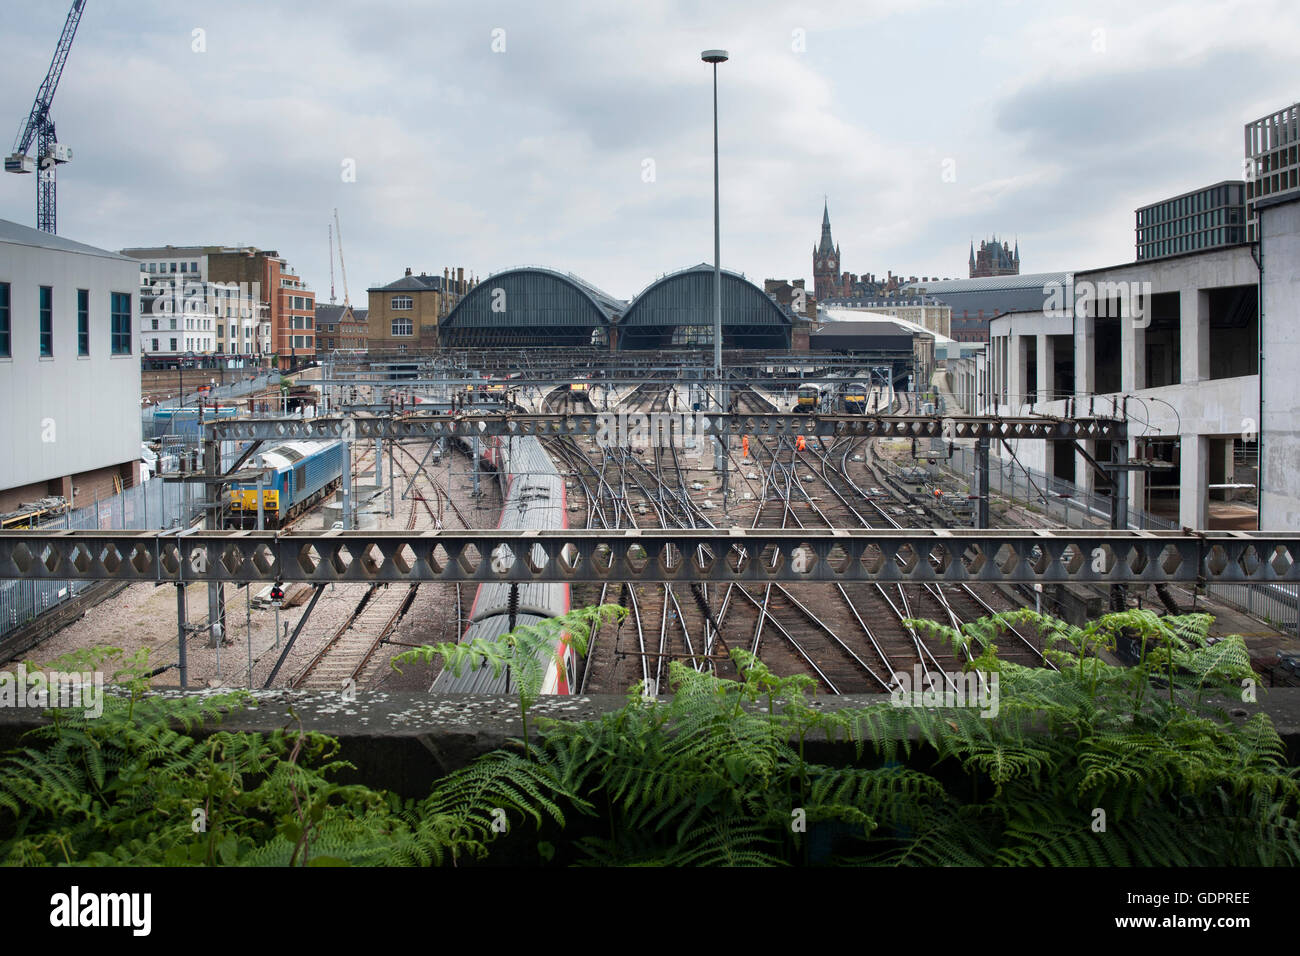 View from Goods Way Bridge to the platforms 1-11 at King's Cross Mainline Station in London, England with St Pancras visible. Stock Photo